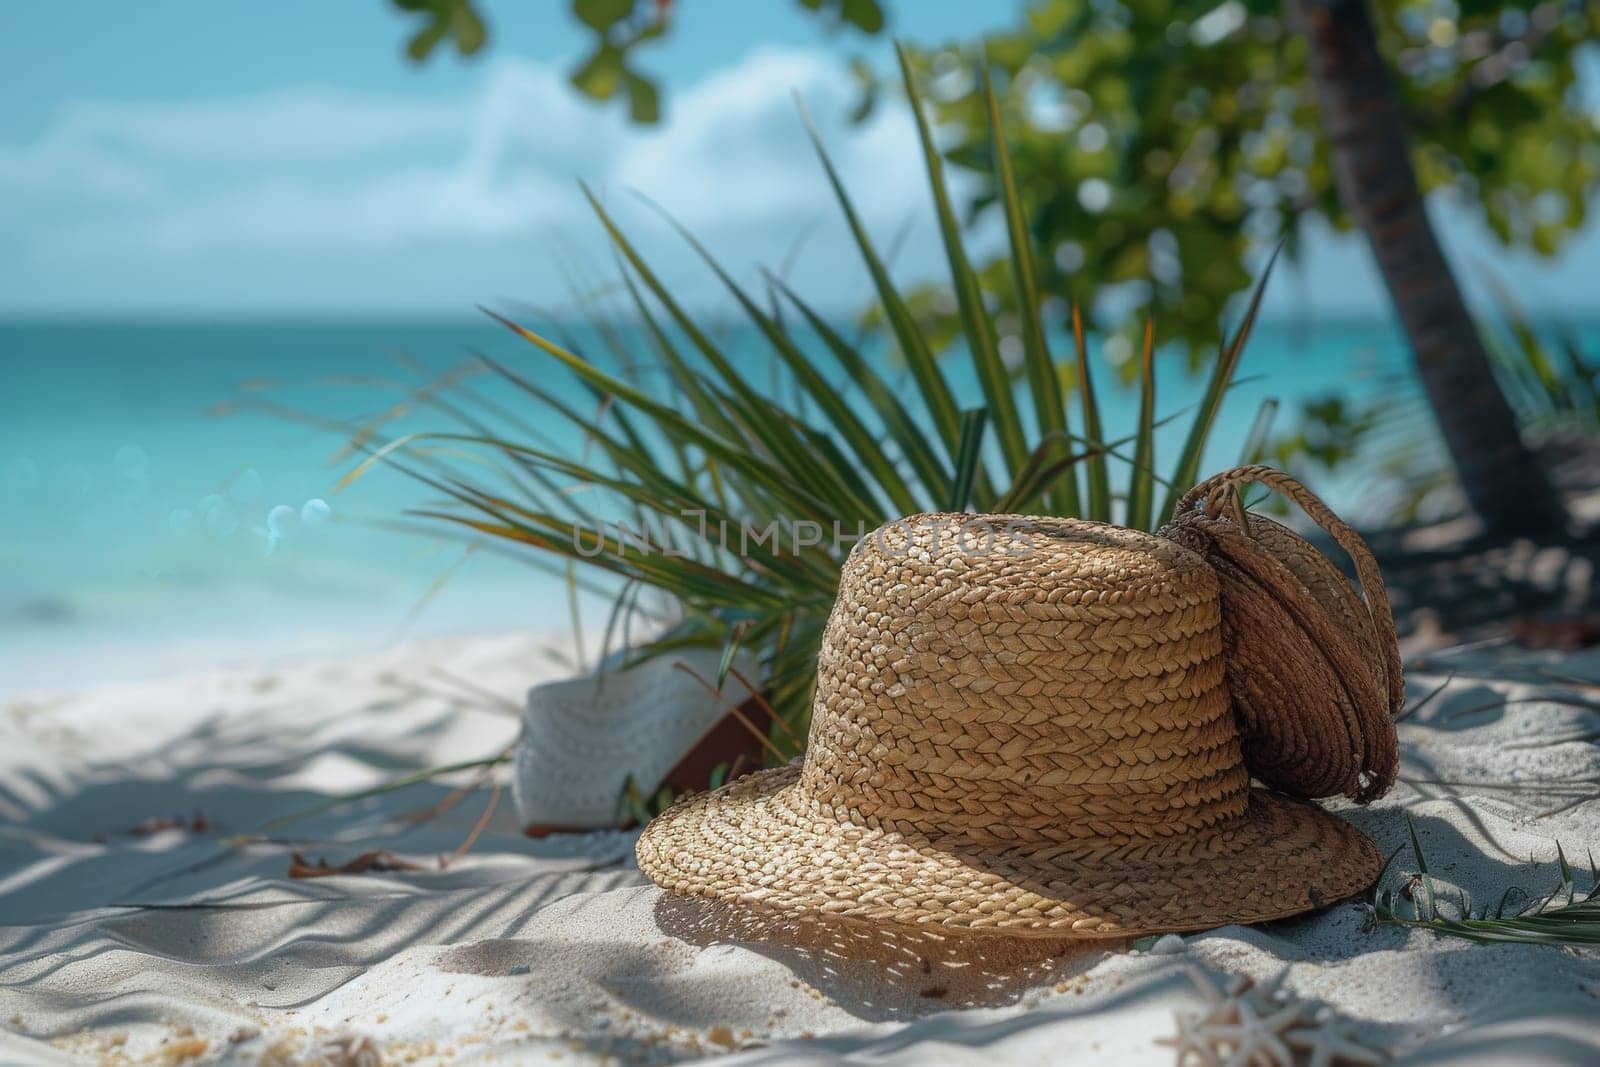 A straw hat is laying on the sand next to a book. The scene is peaceful and relaxing, with the hat and book suggesting a leisurely day spent on the beach